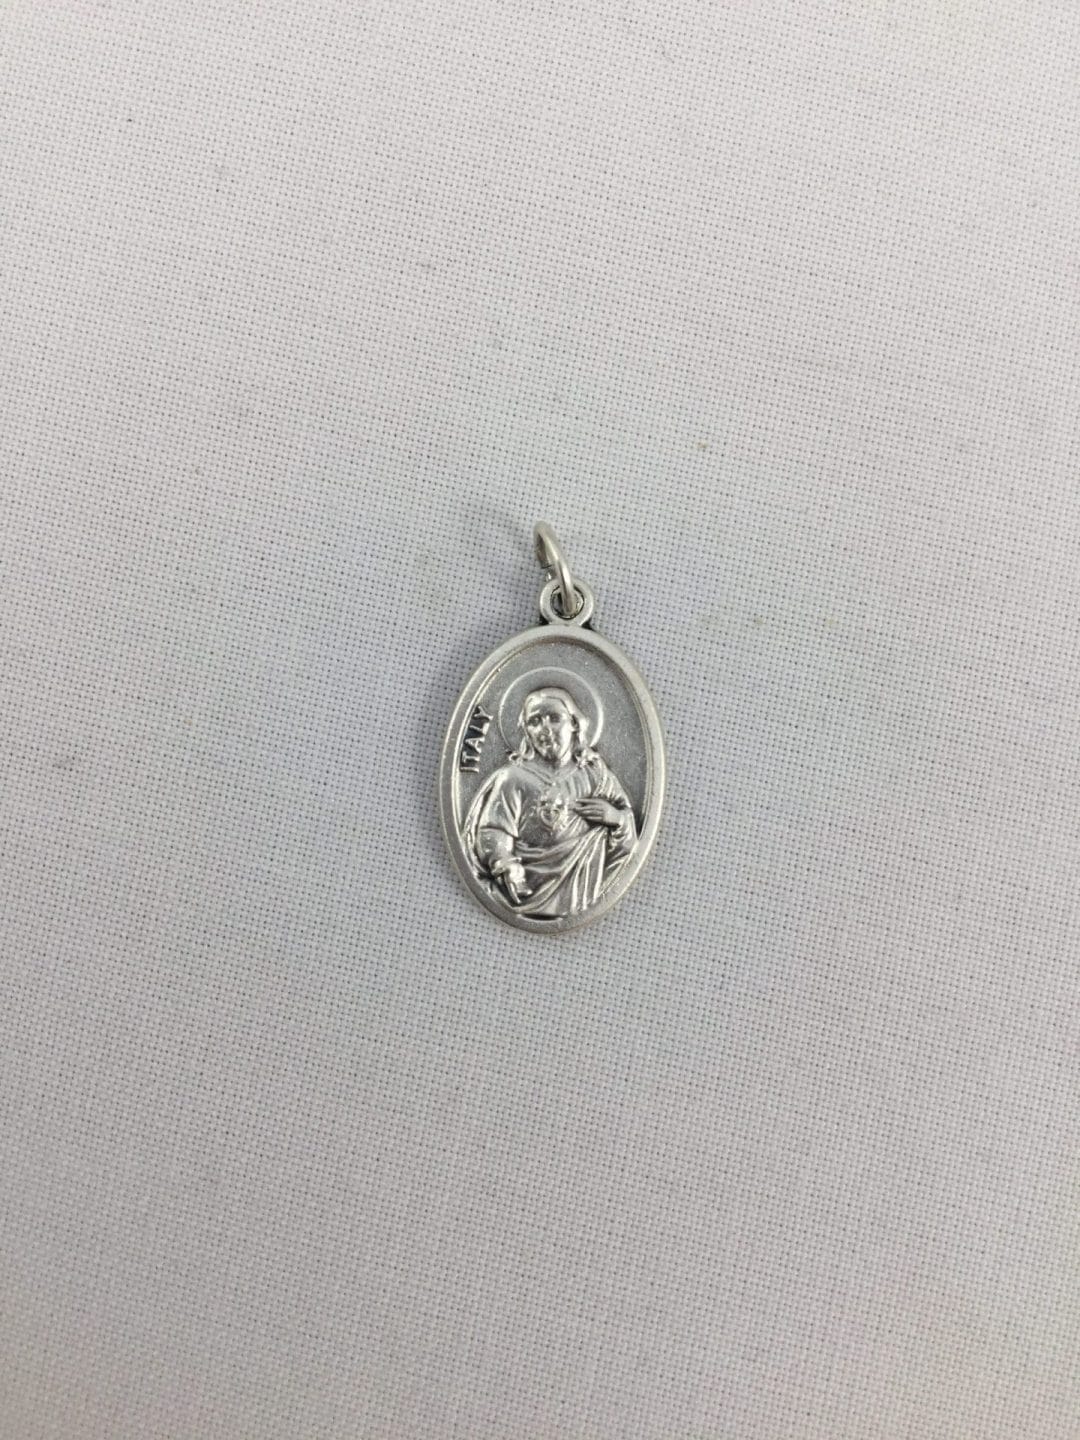 Our Lady Of Mount Carmel Medal (Scapular Medal) | Church Stores